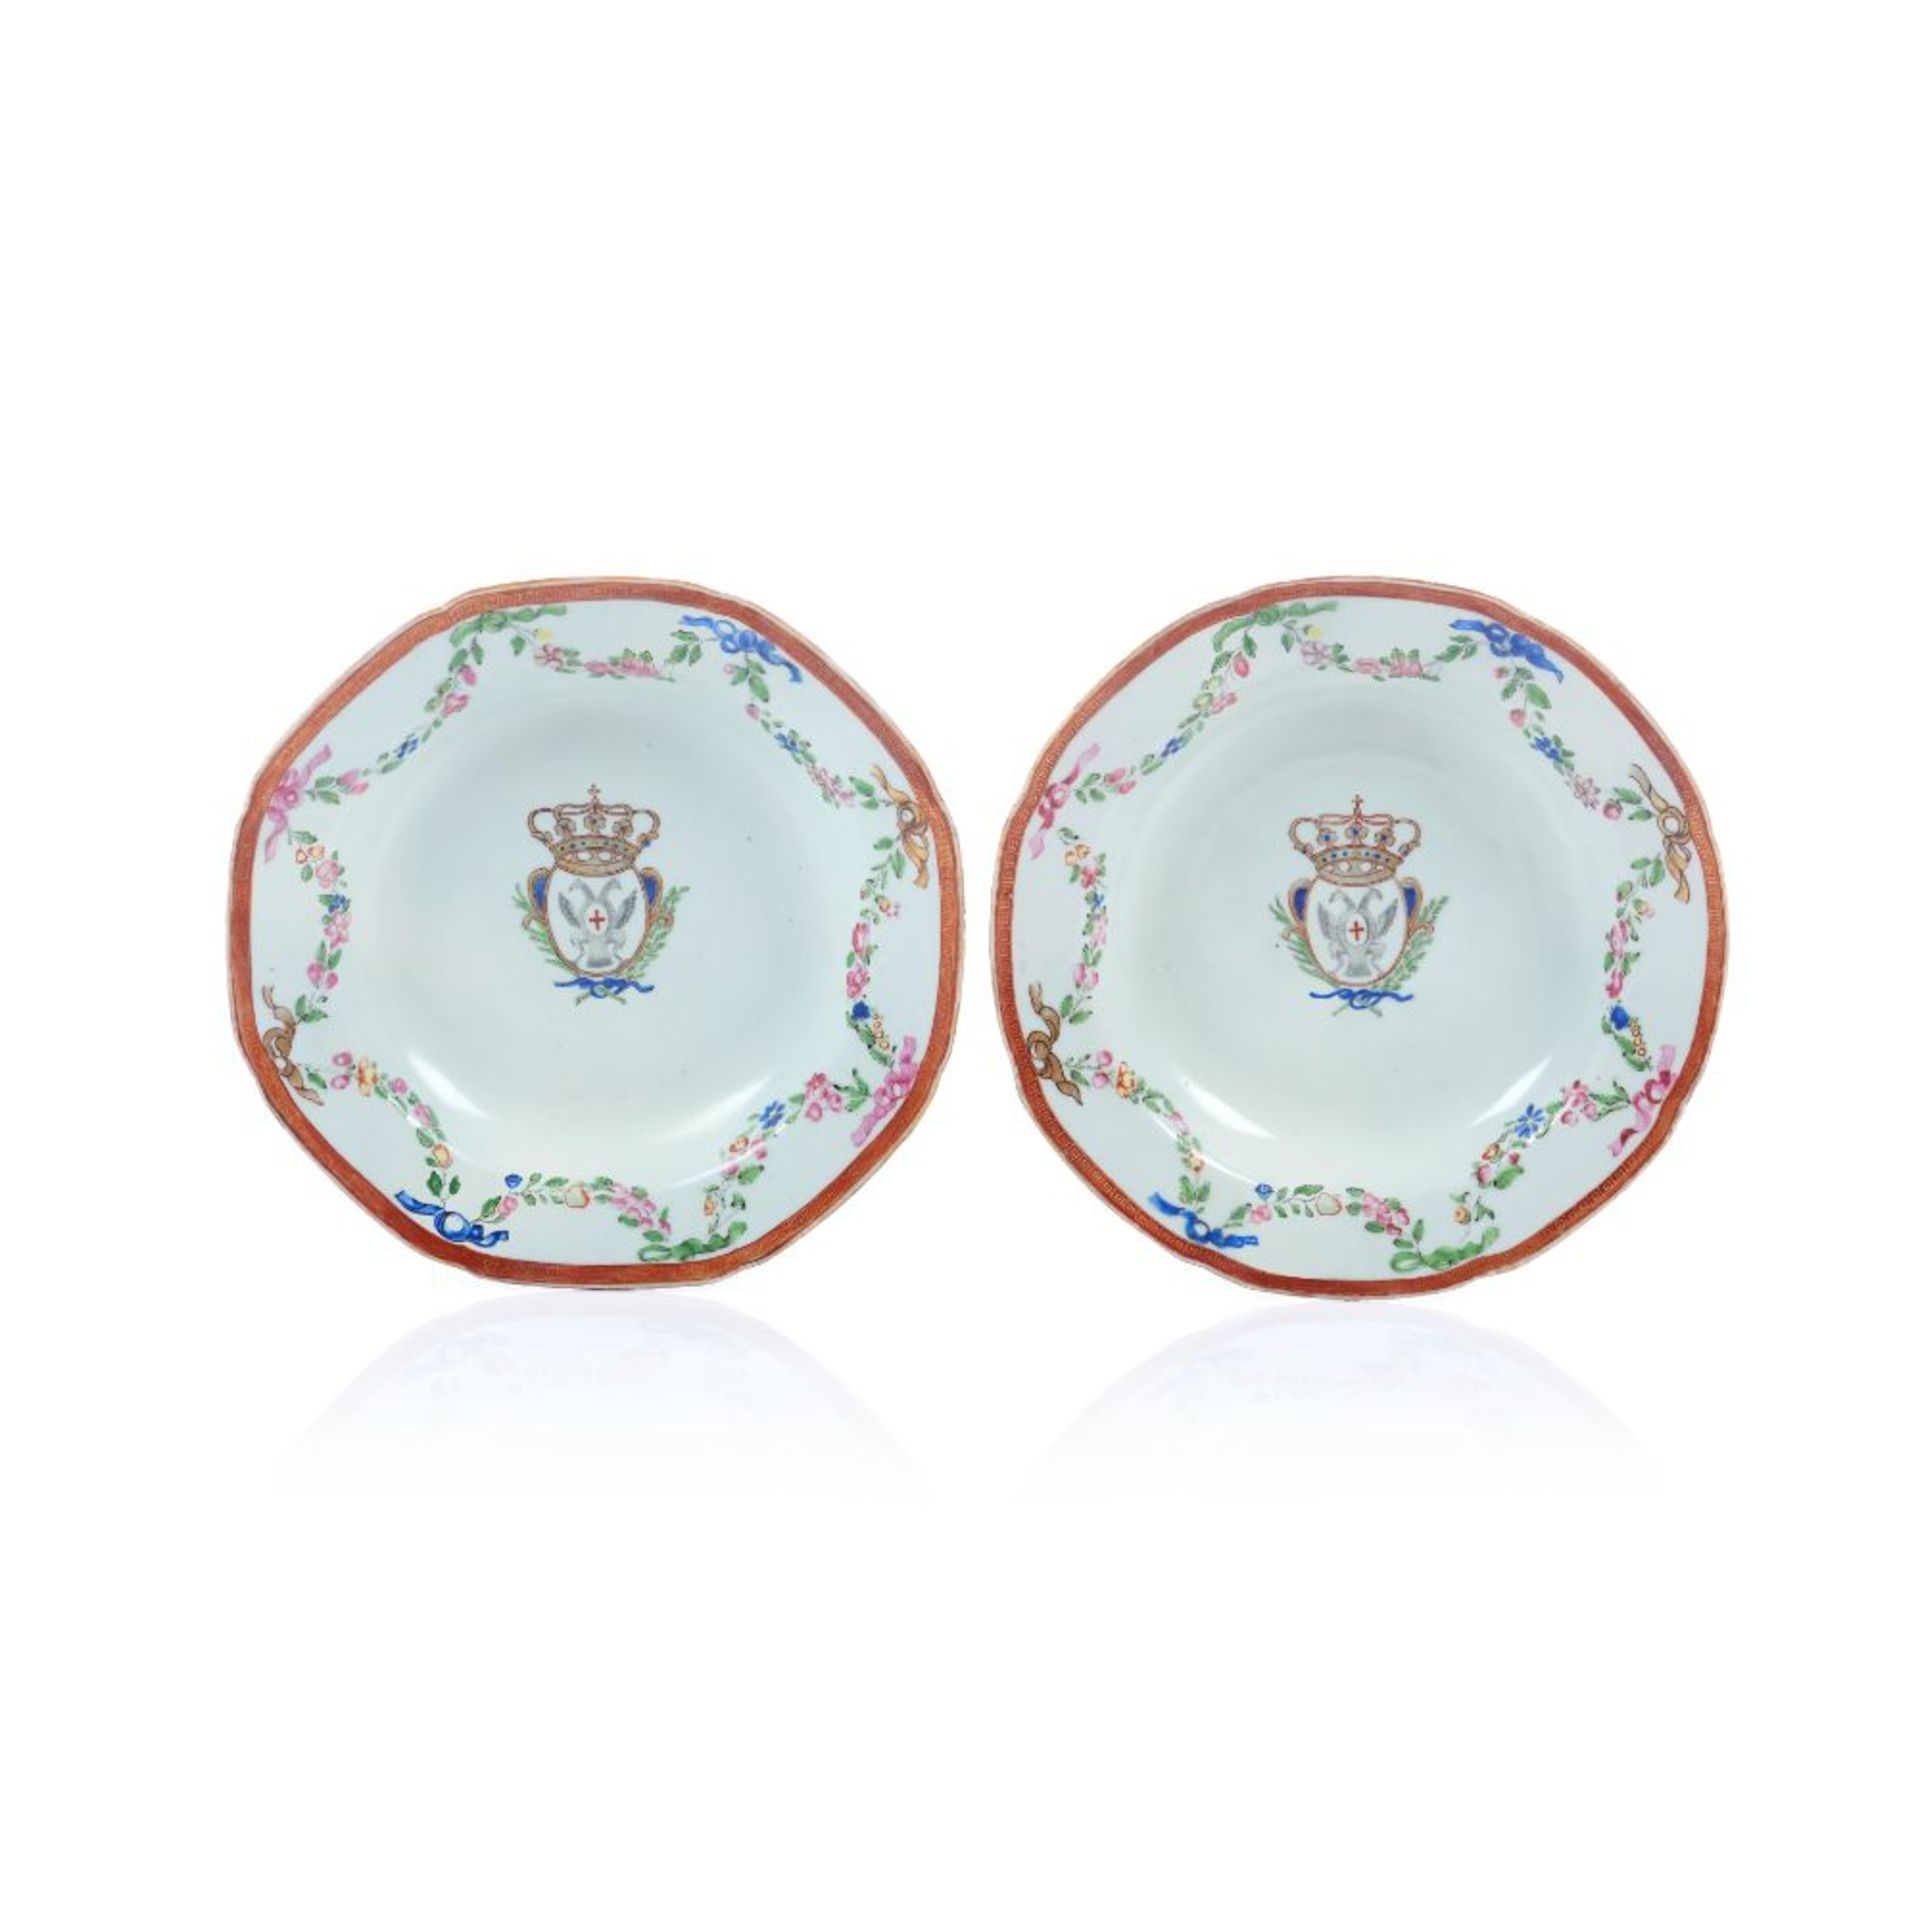 A pair of armorial plates 